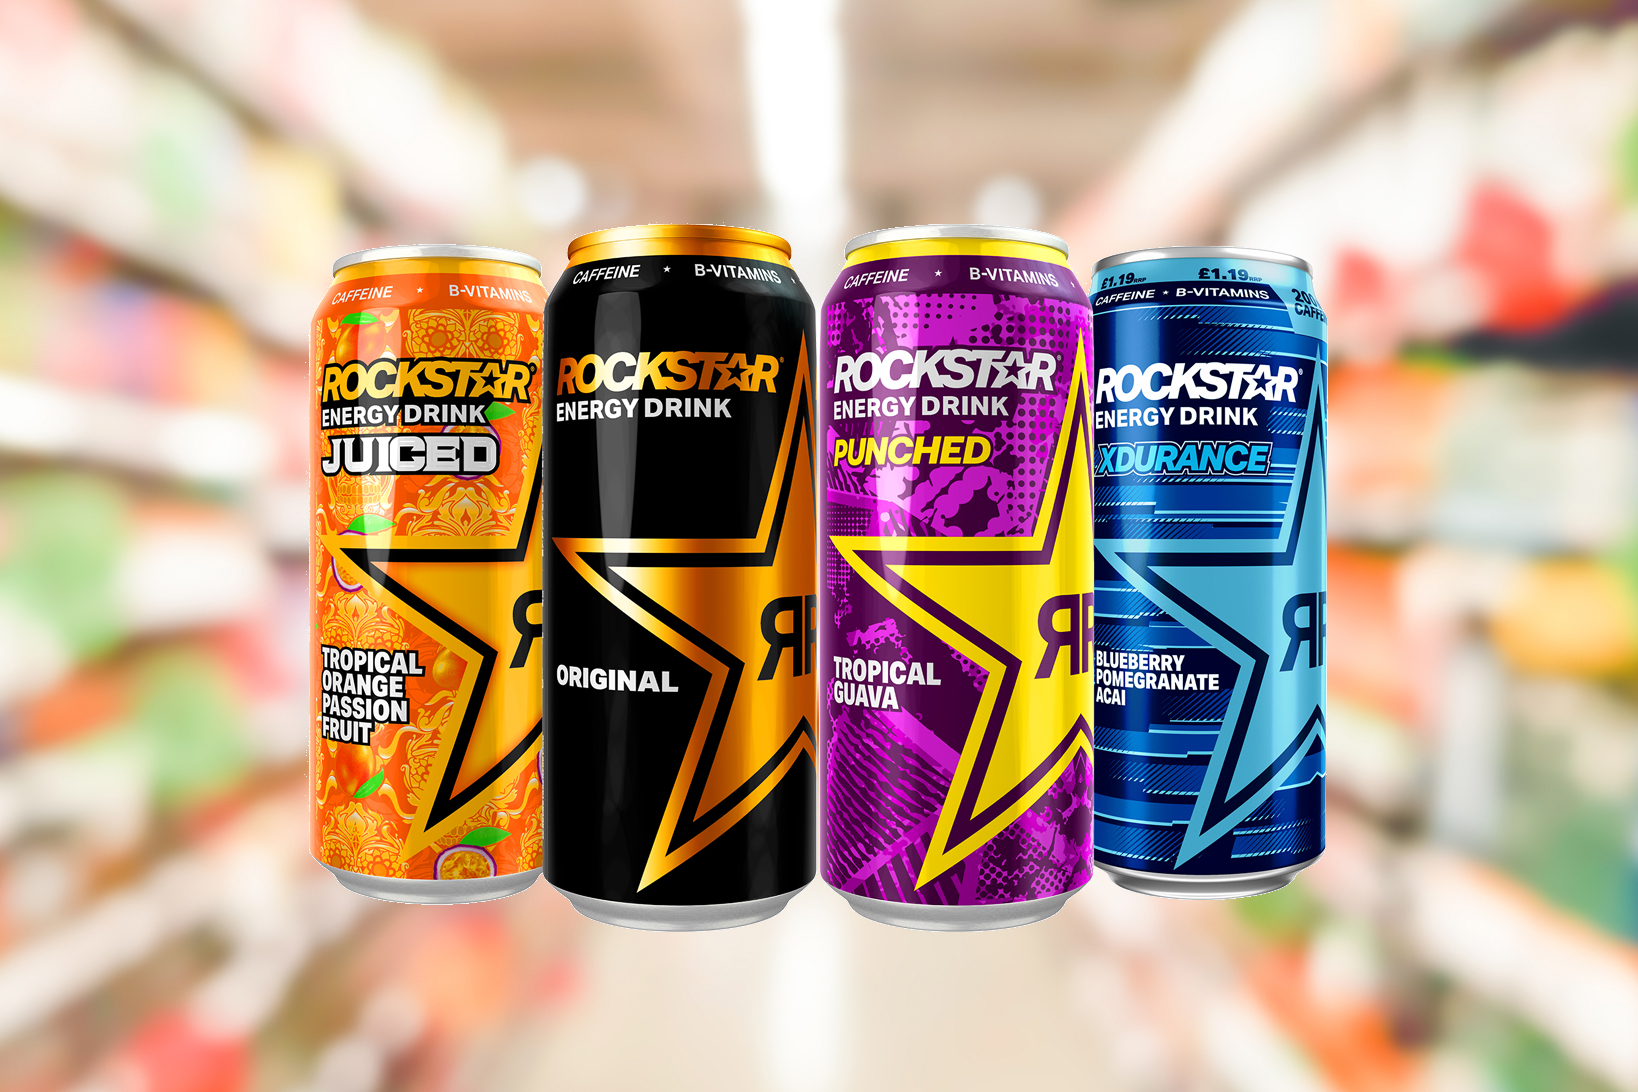 Rockstar energy drinks competition Product news